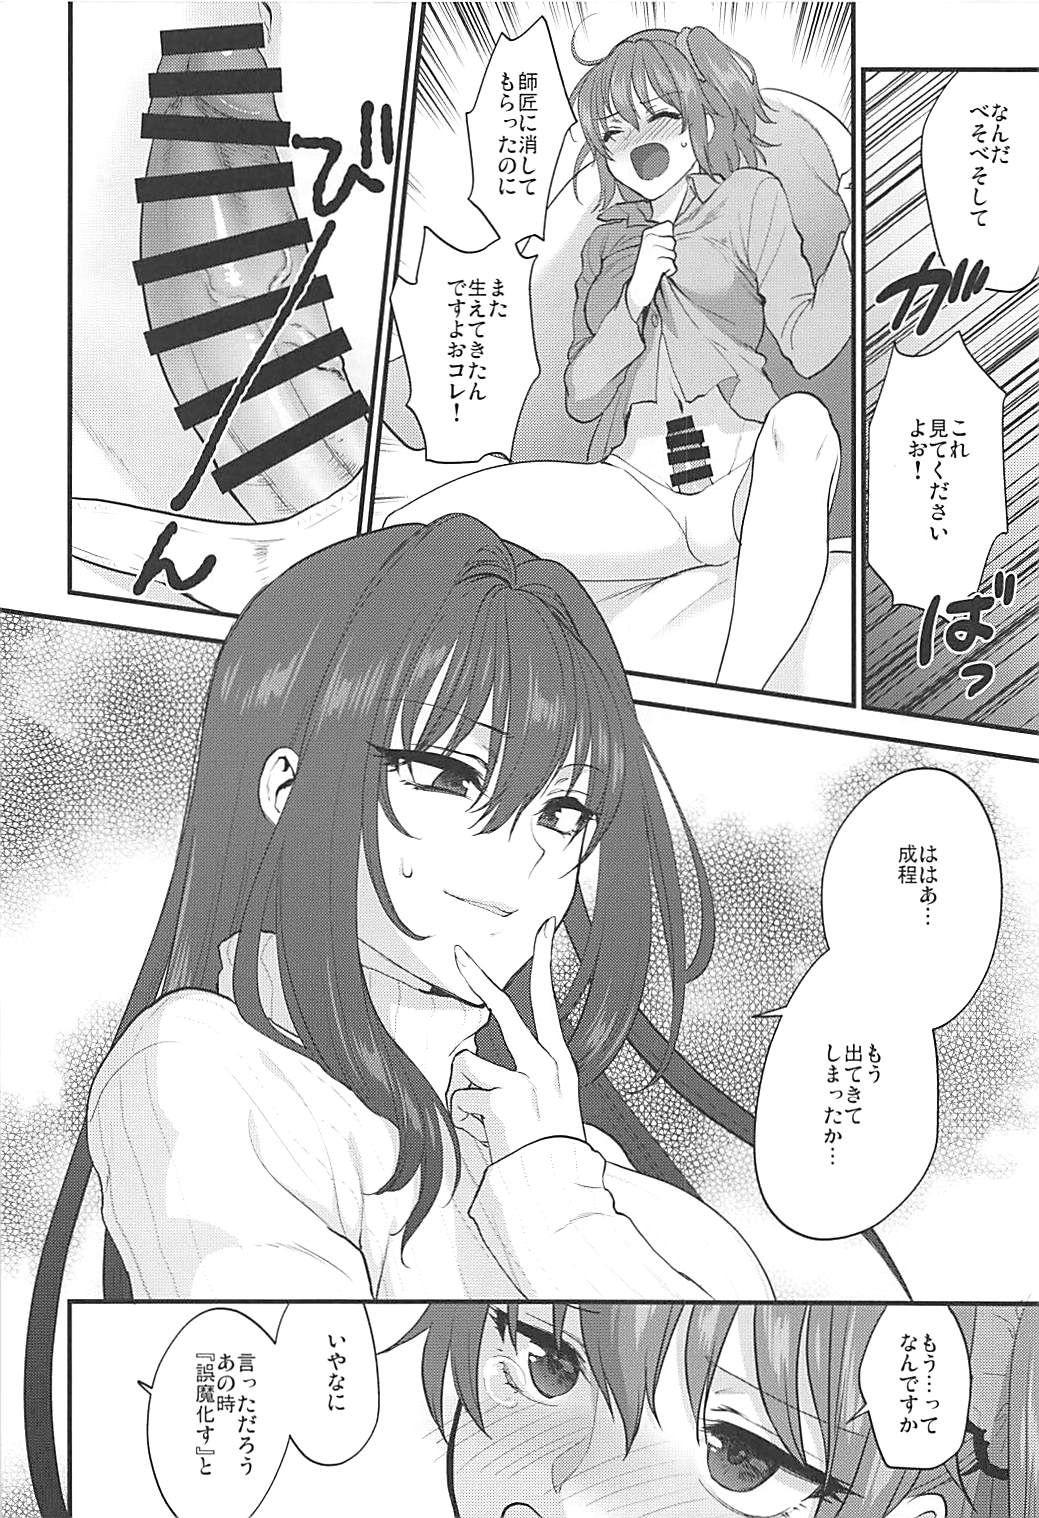 Free Rough Porn In my room. - Fate grand order Amateursex - Page 5